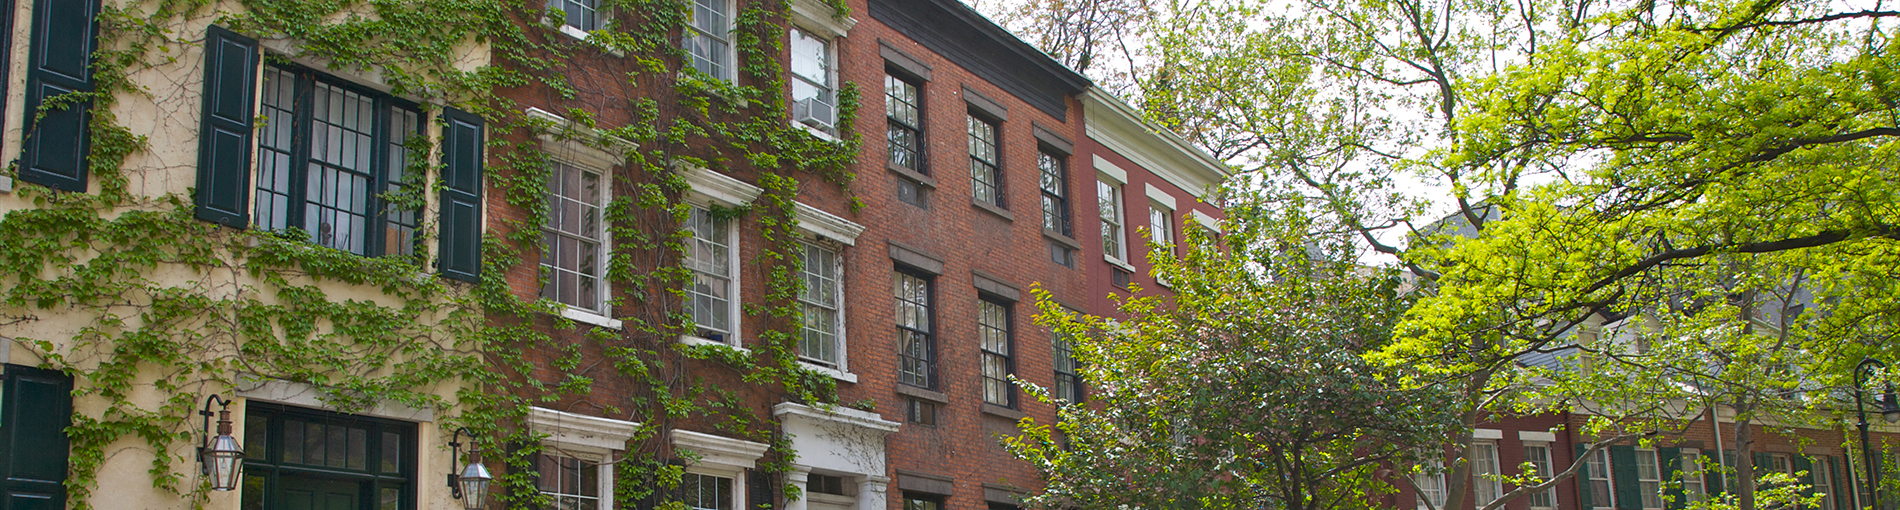 NYC renters trade up - featured image - rowhouses